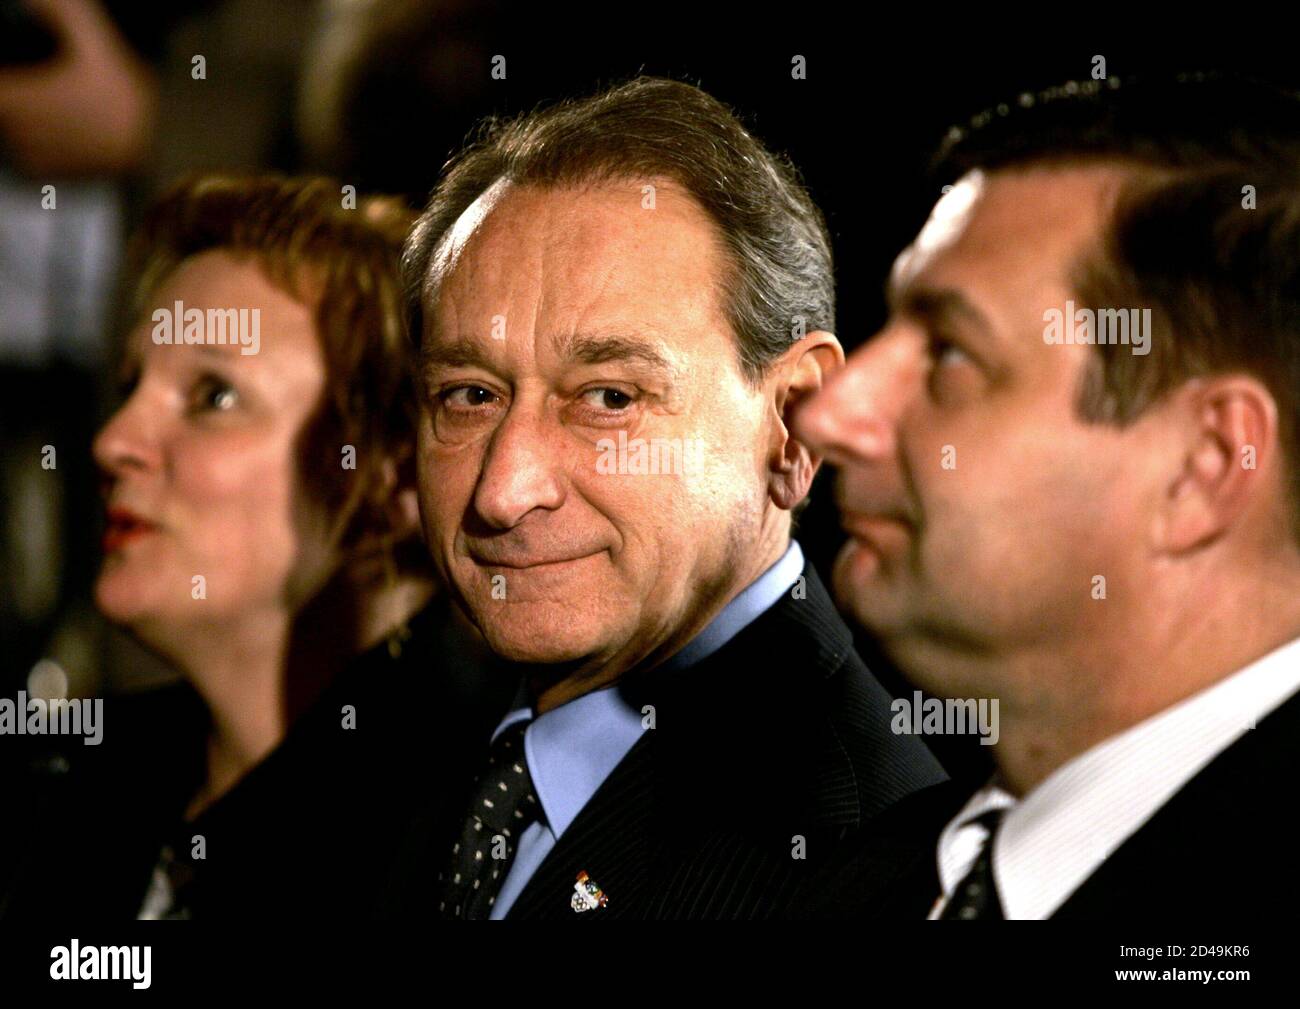 Paris's Mayor Bertrand Delanoe (C) looks at French sports Minister Jean-Francois Lamour during the International Olympic Committee Evaluation Commission press conference in a Paris hotel, March 12, 2005. The IOC evaluation commission is ending a 4-day visit to examine Paris'bid for the 2012 Summer Olympic Games. Stock Photo